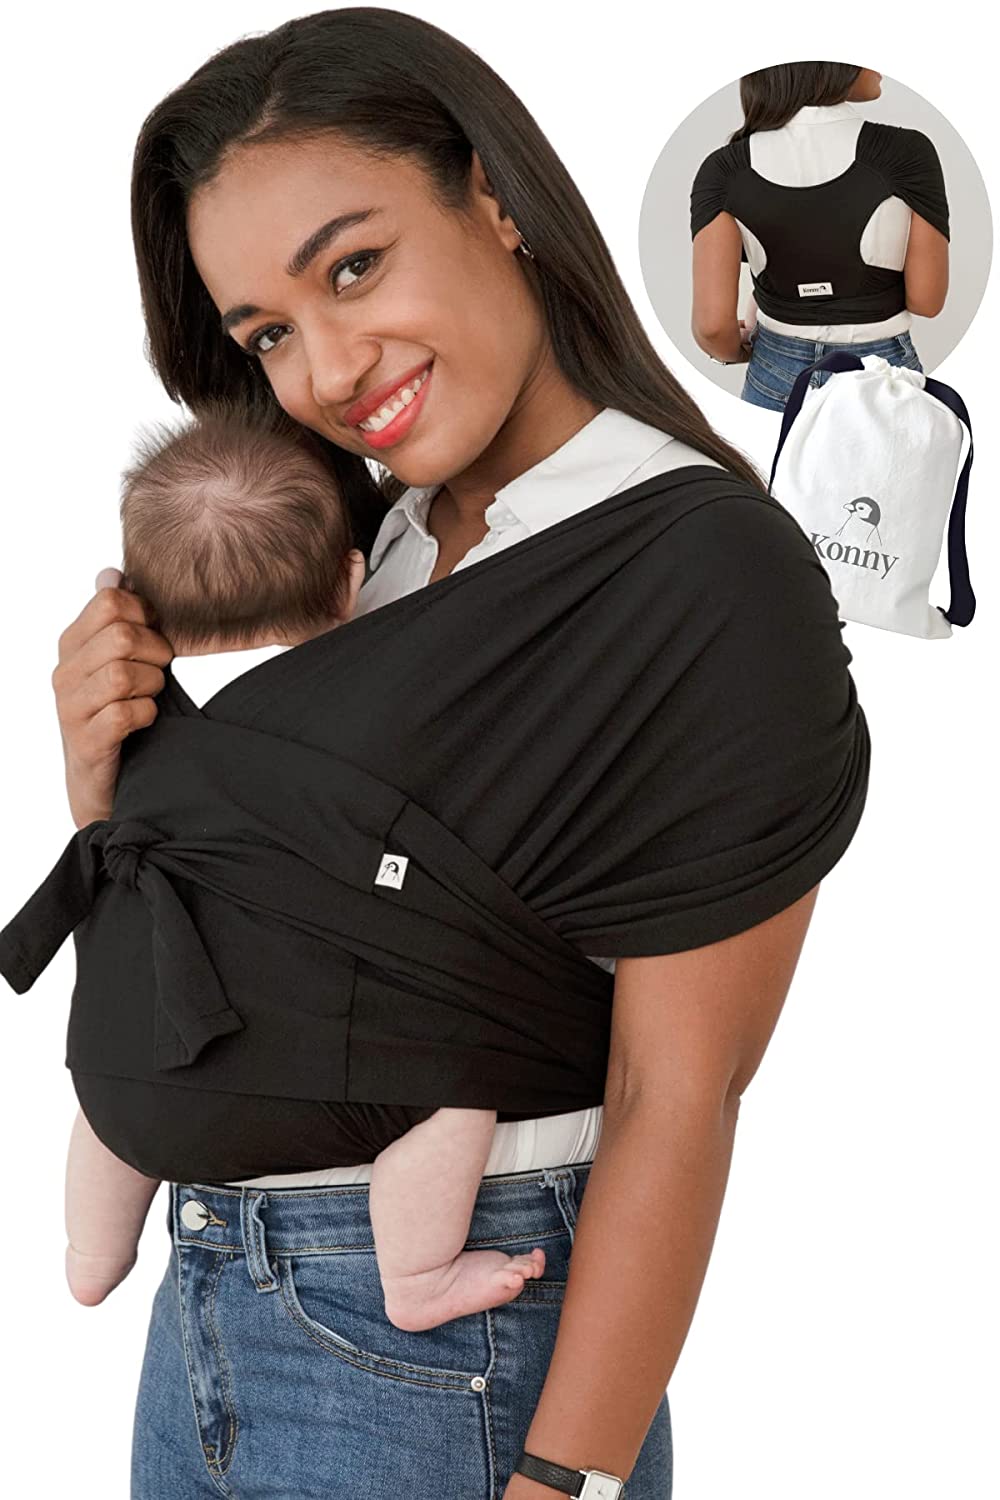 Konny Baby Carrier | Ultra-Light, Easy Baby Sling | Newborns, Infants up to 20 kg Toddlers | Soft and Breathable Fabric | Useful Sleep Solution (Black, S)